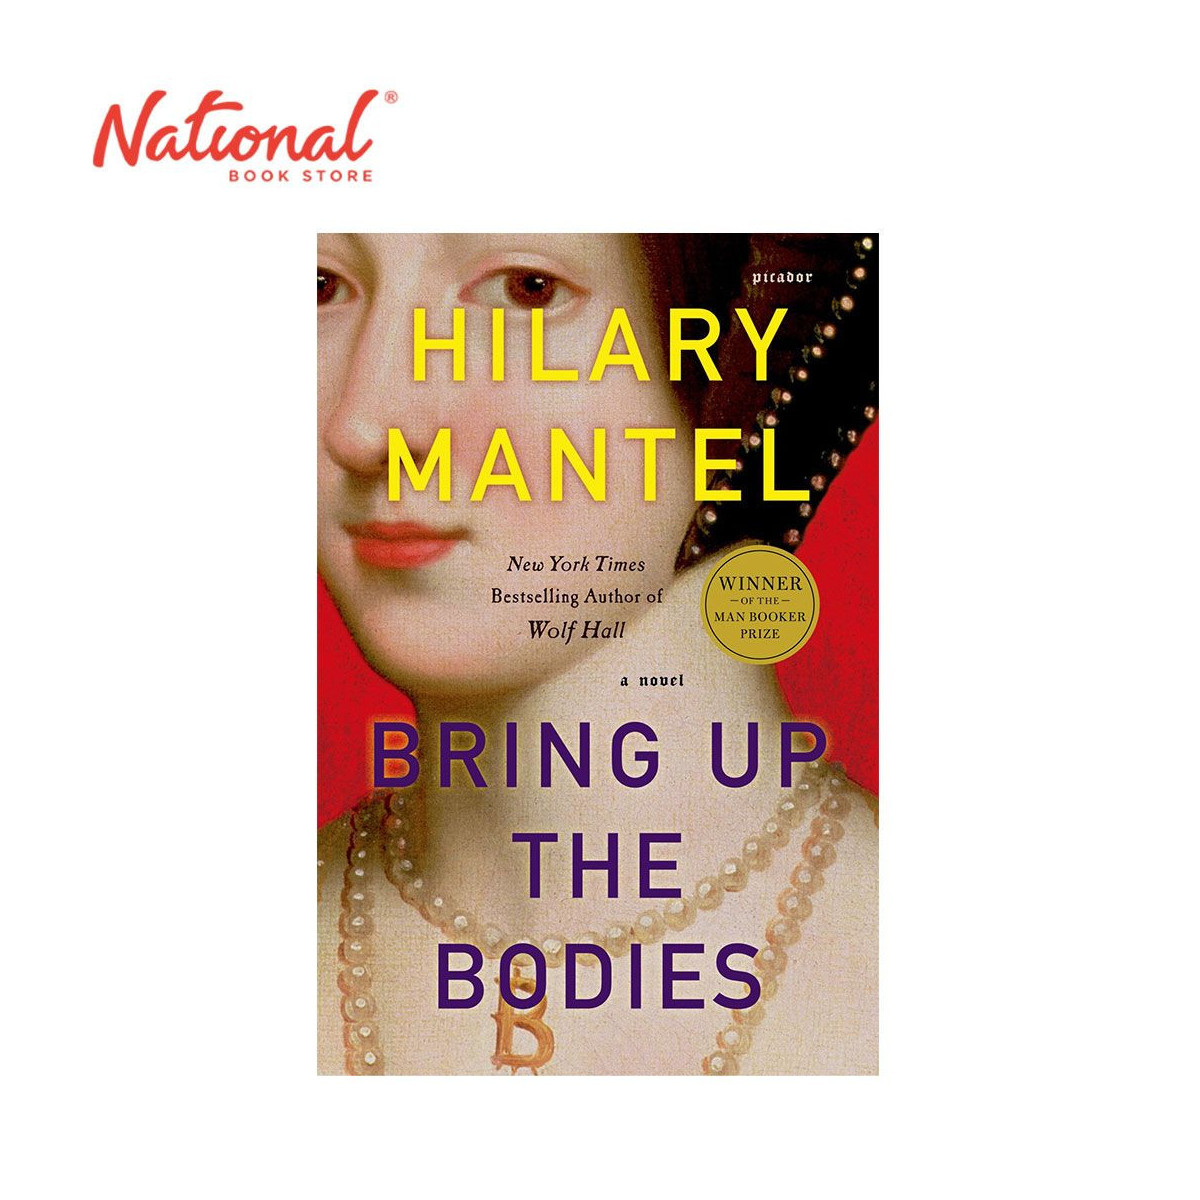 Bring Up The Bodies: A Novel by Hilary Mantel - Trade Paperback - Contemporary Fiction